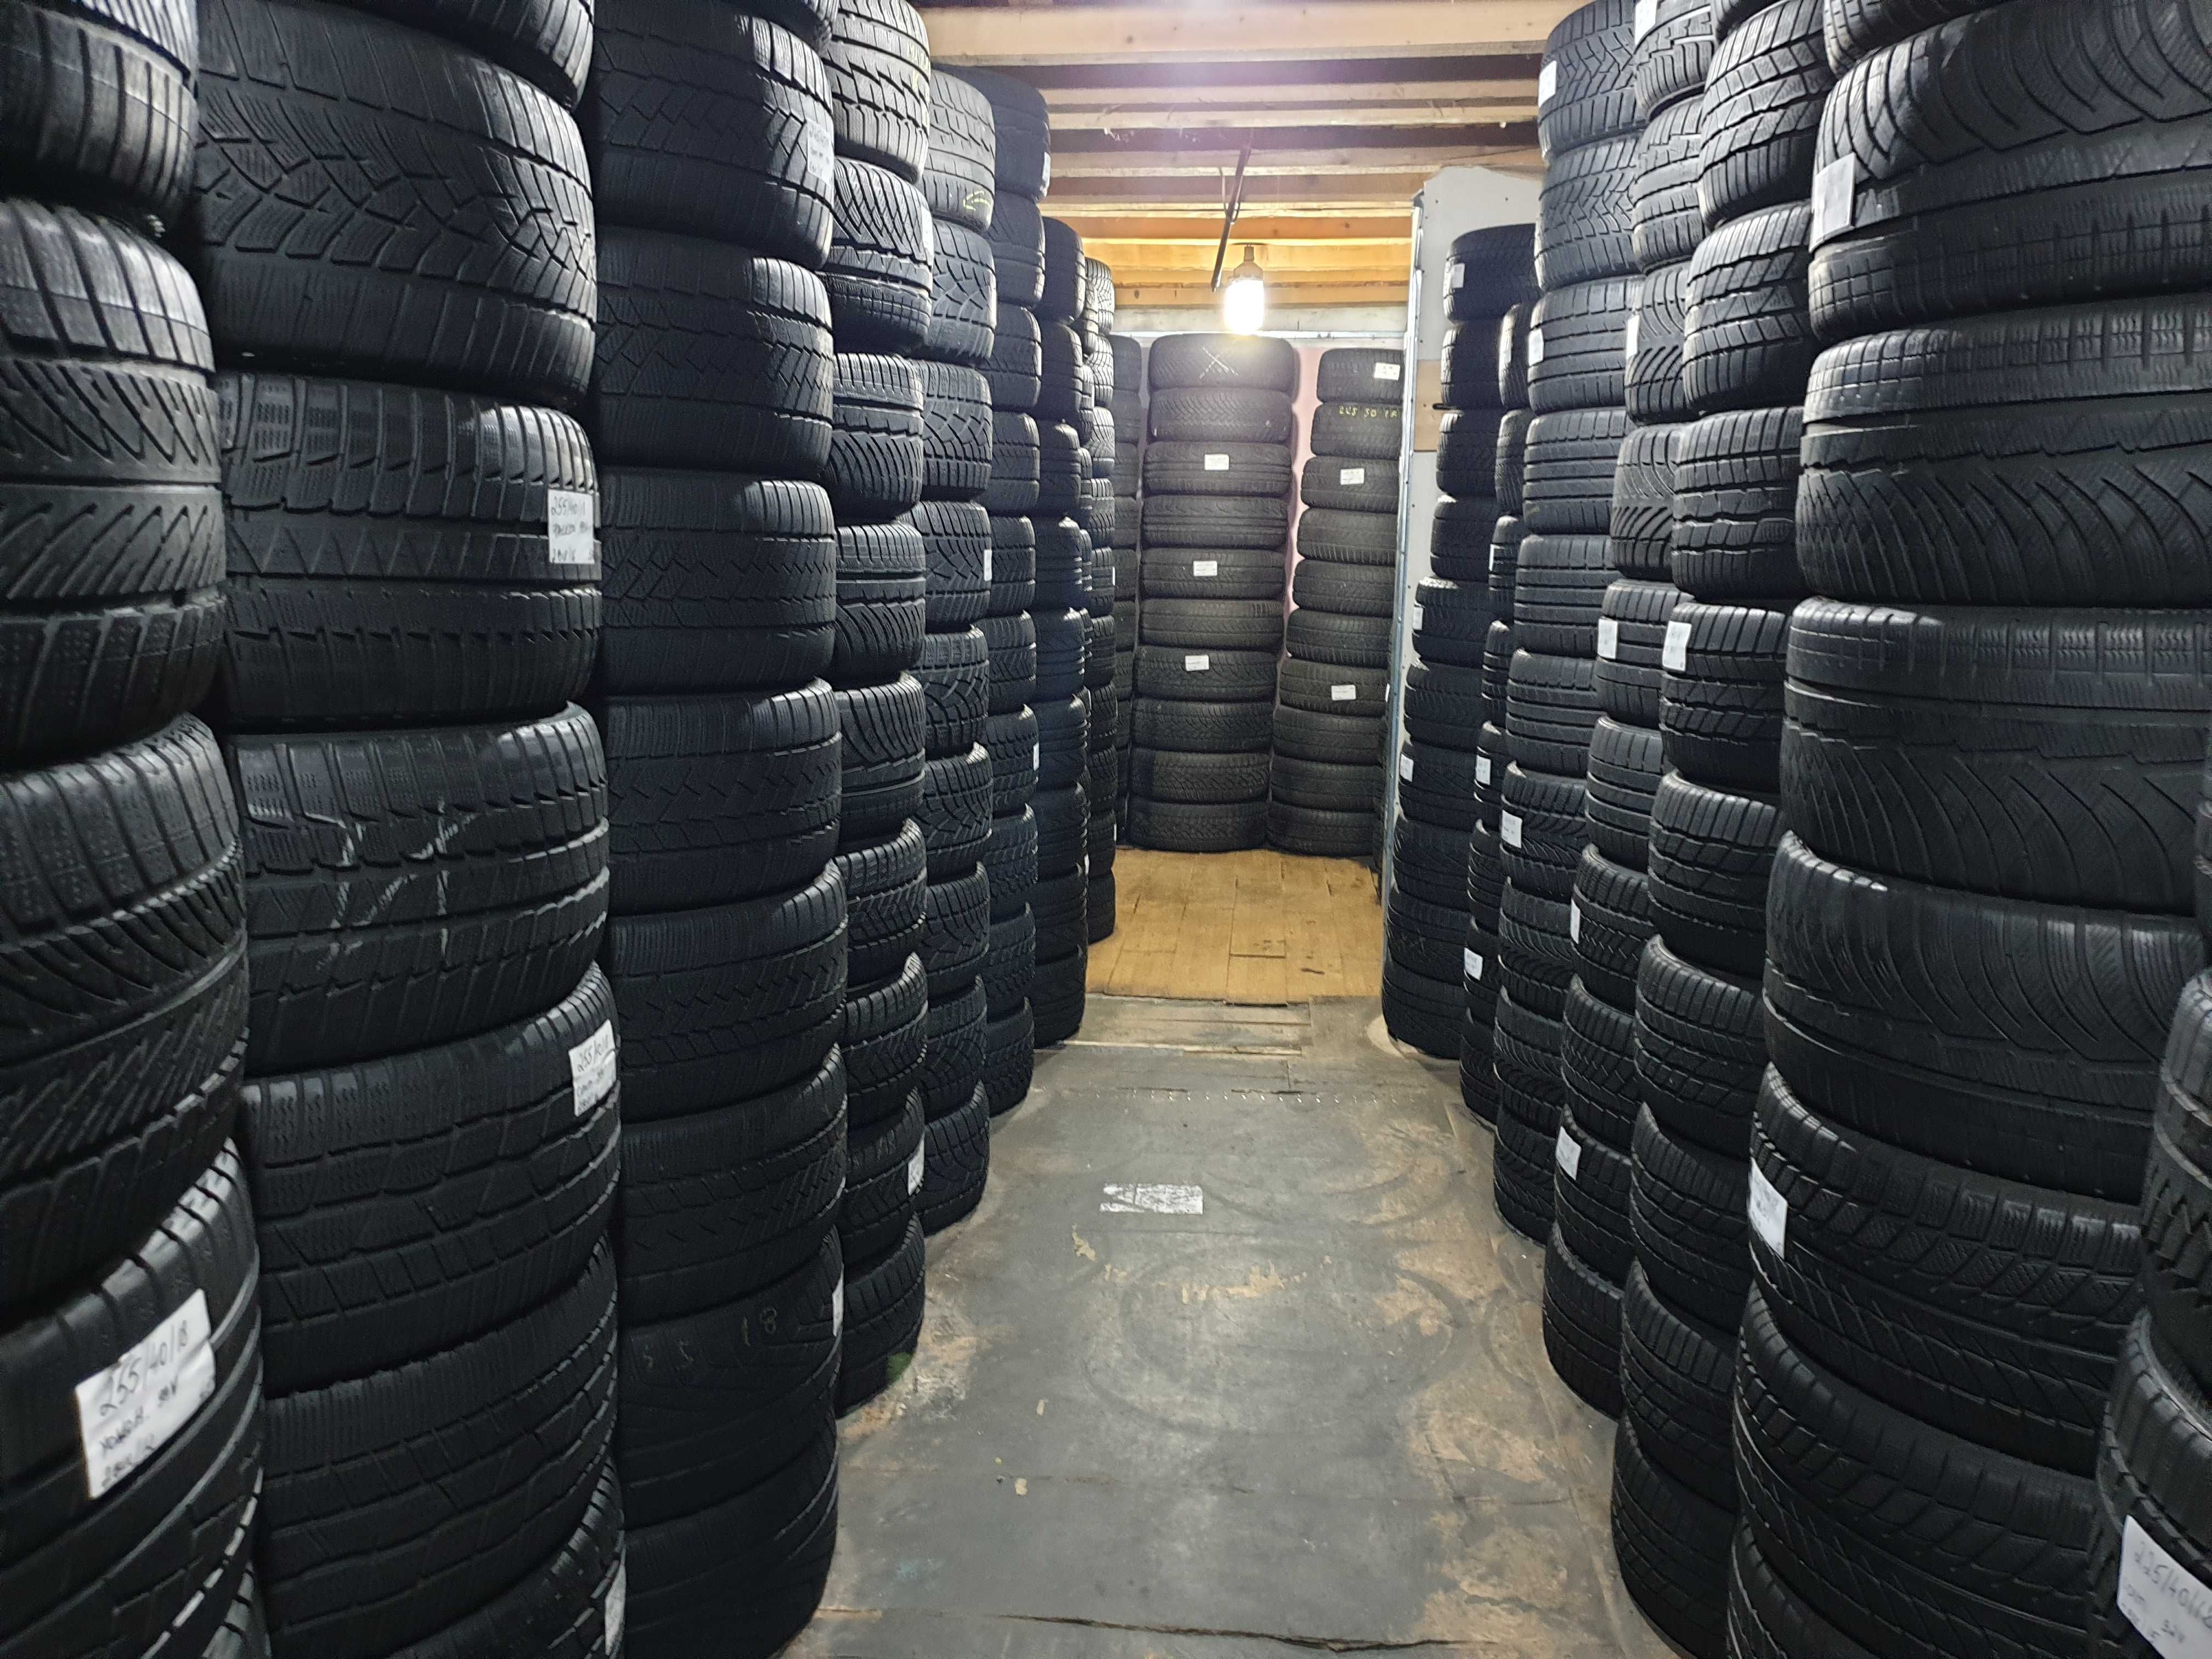 Anvelope Second Hand Michelin Vara-205/45 R17 88V,in stoc R18/19/20